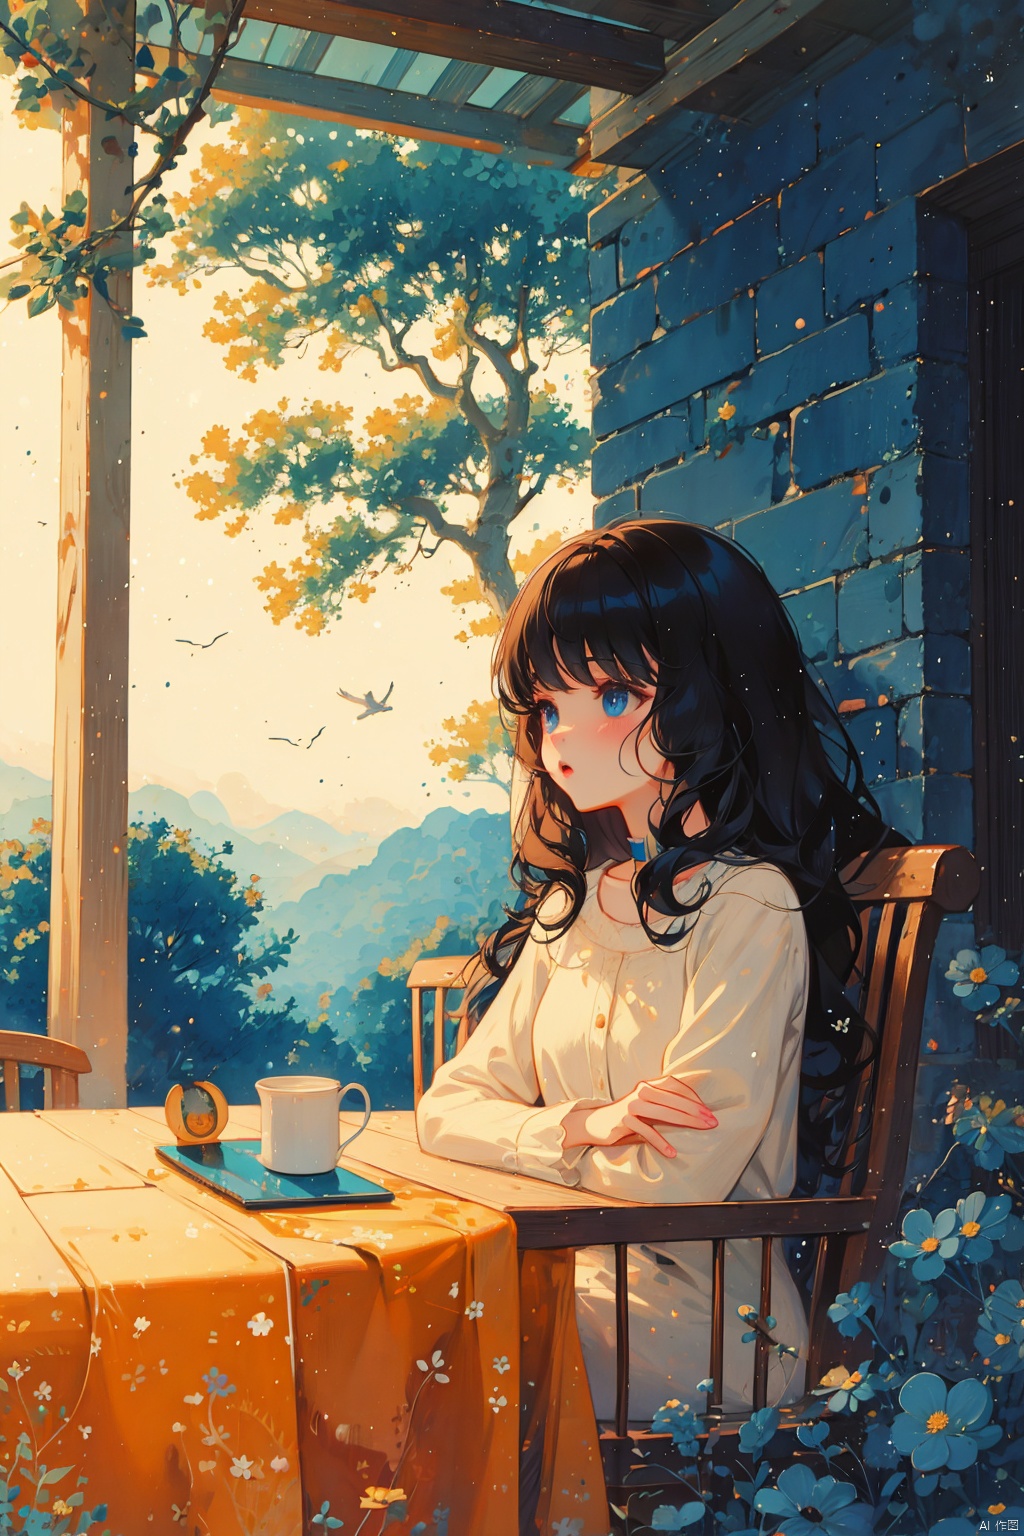  (((1cat))) in an veranda interior with trees and plants on it and flowers on the walls, ((outdoor:1.4)), tumblr, Artstation, doku-doku-kinoko, magical realism, Fairy tale, Line, magic realism, pixiv, Flower, cg society , Anime, Beatrix Potter, totorina, Subterranean, Still life, Magical girl, Animal tale, Adventure fantasy, still life, rayonism, aestheticism, Landscape, neo-romanticism, capy-shuupan, Georgette Chen, Chang Ucchin, Hidari, Jeanne-Claude, computer graphics, cgsociety, shinei-neko-hakase, uri-tan, no_human, no_humans, illustration,vector art,tshee00d,vector style